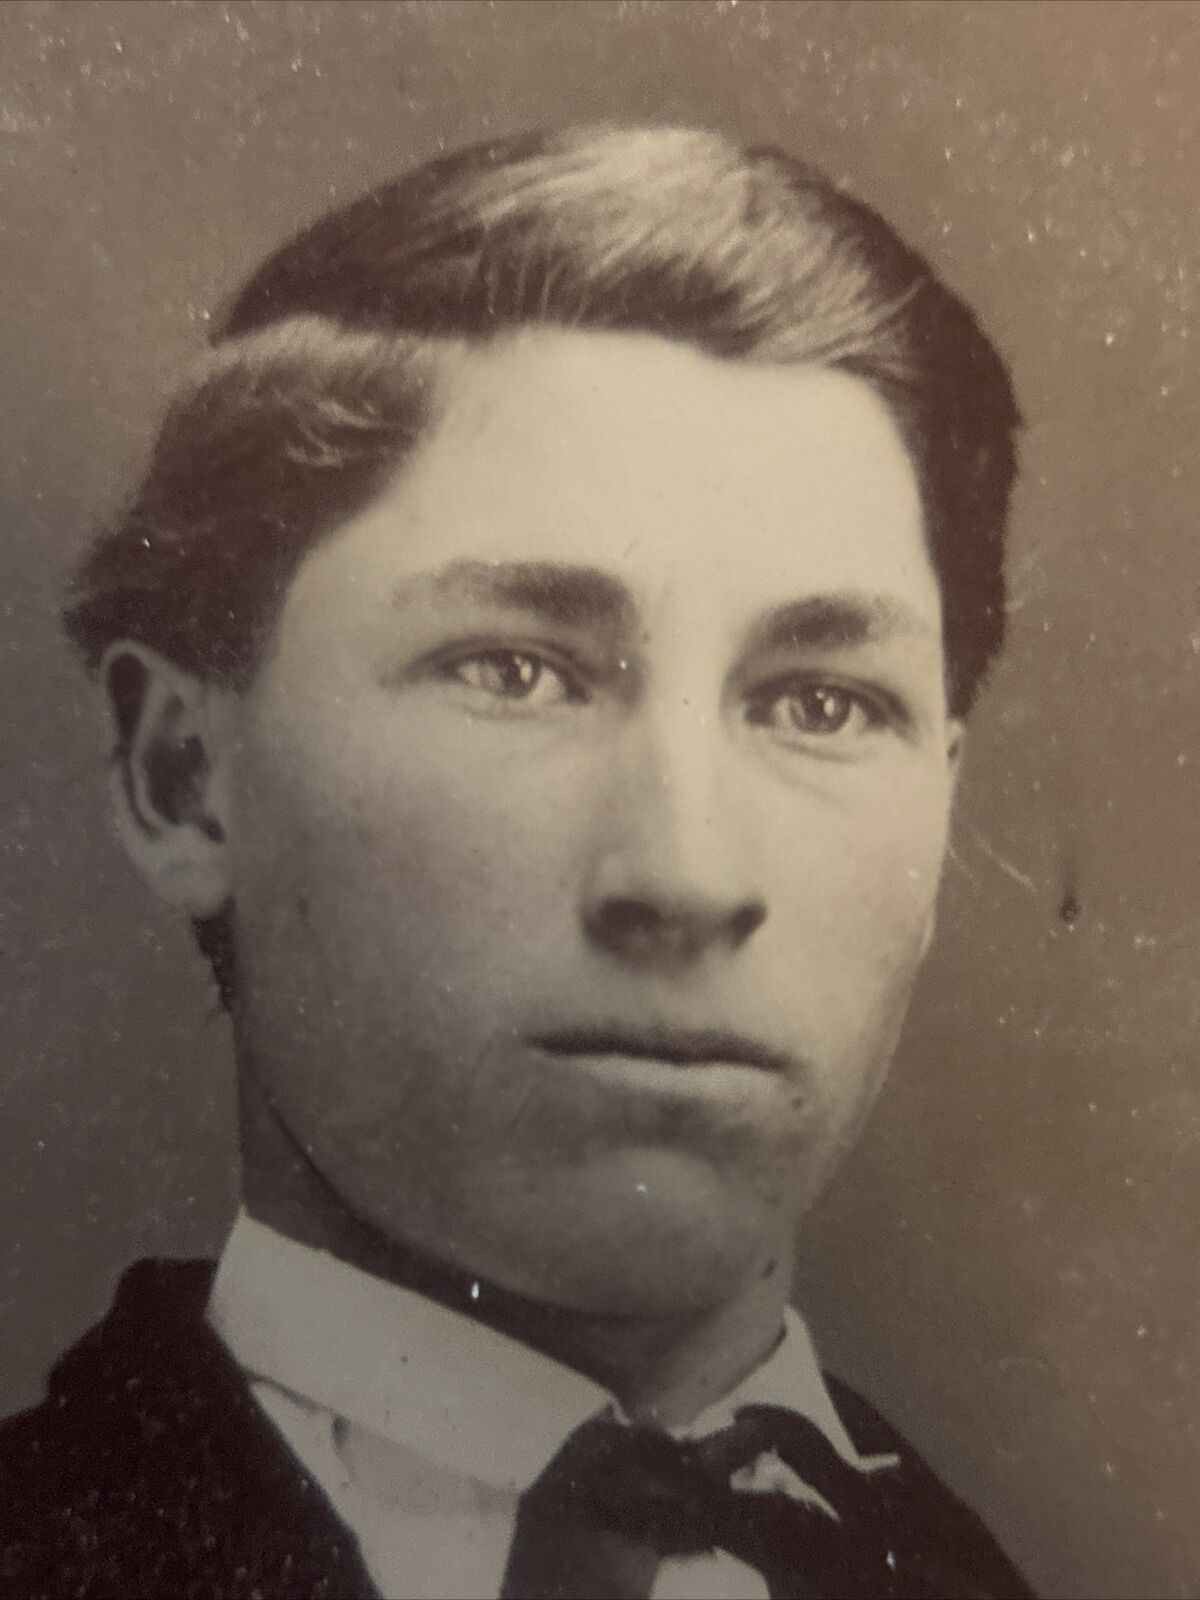 Tintype Photograph of Young Man 1860’s